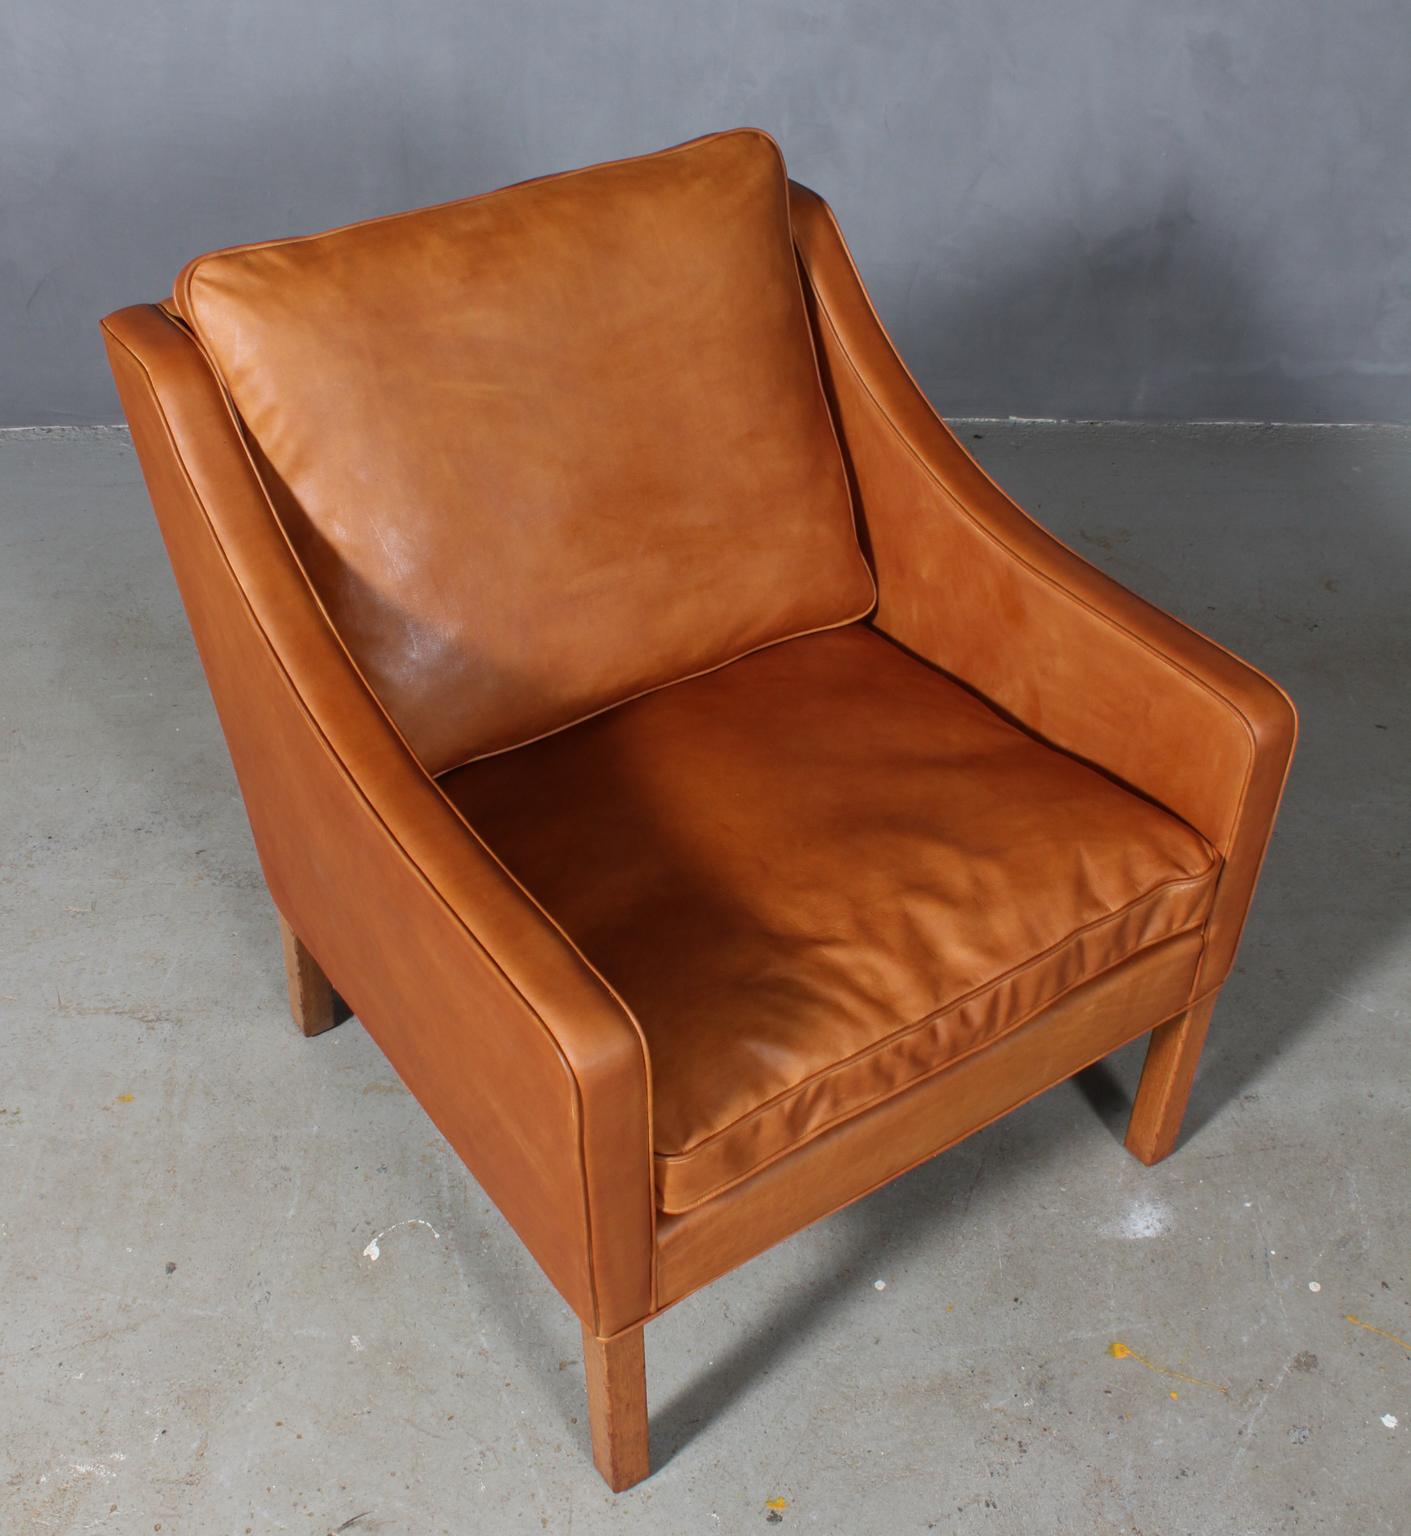 Børge Mogensen lounge chair new upholstered with vintage tan aniline leather.

Legs of teak.

Model 2207, made by Fredericia furniture.